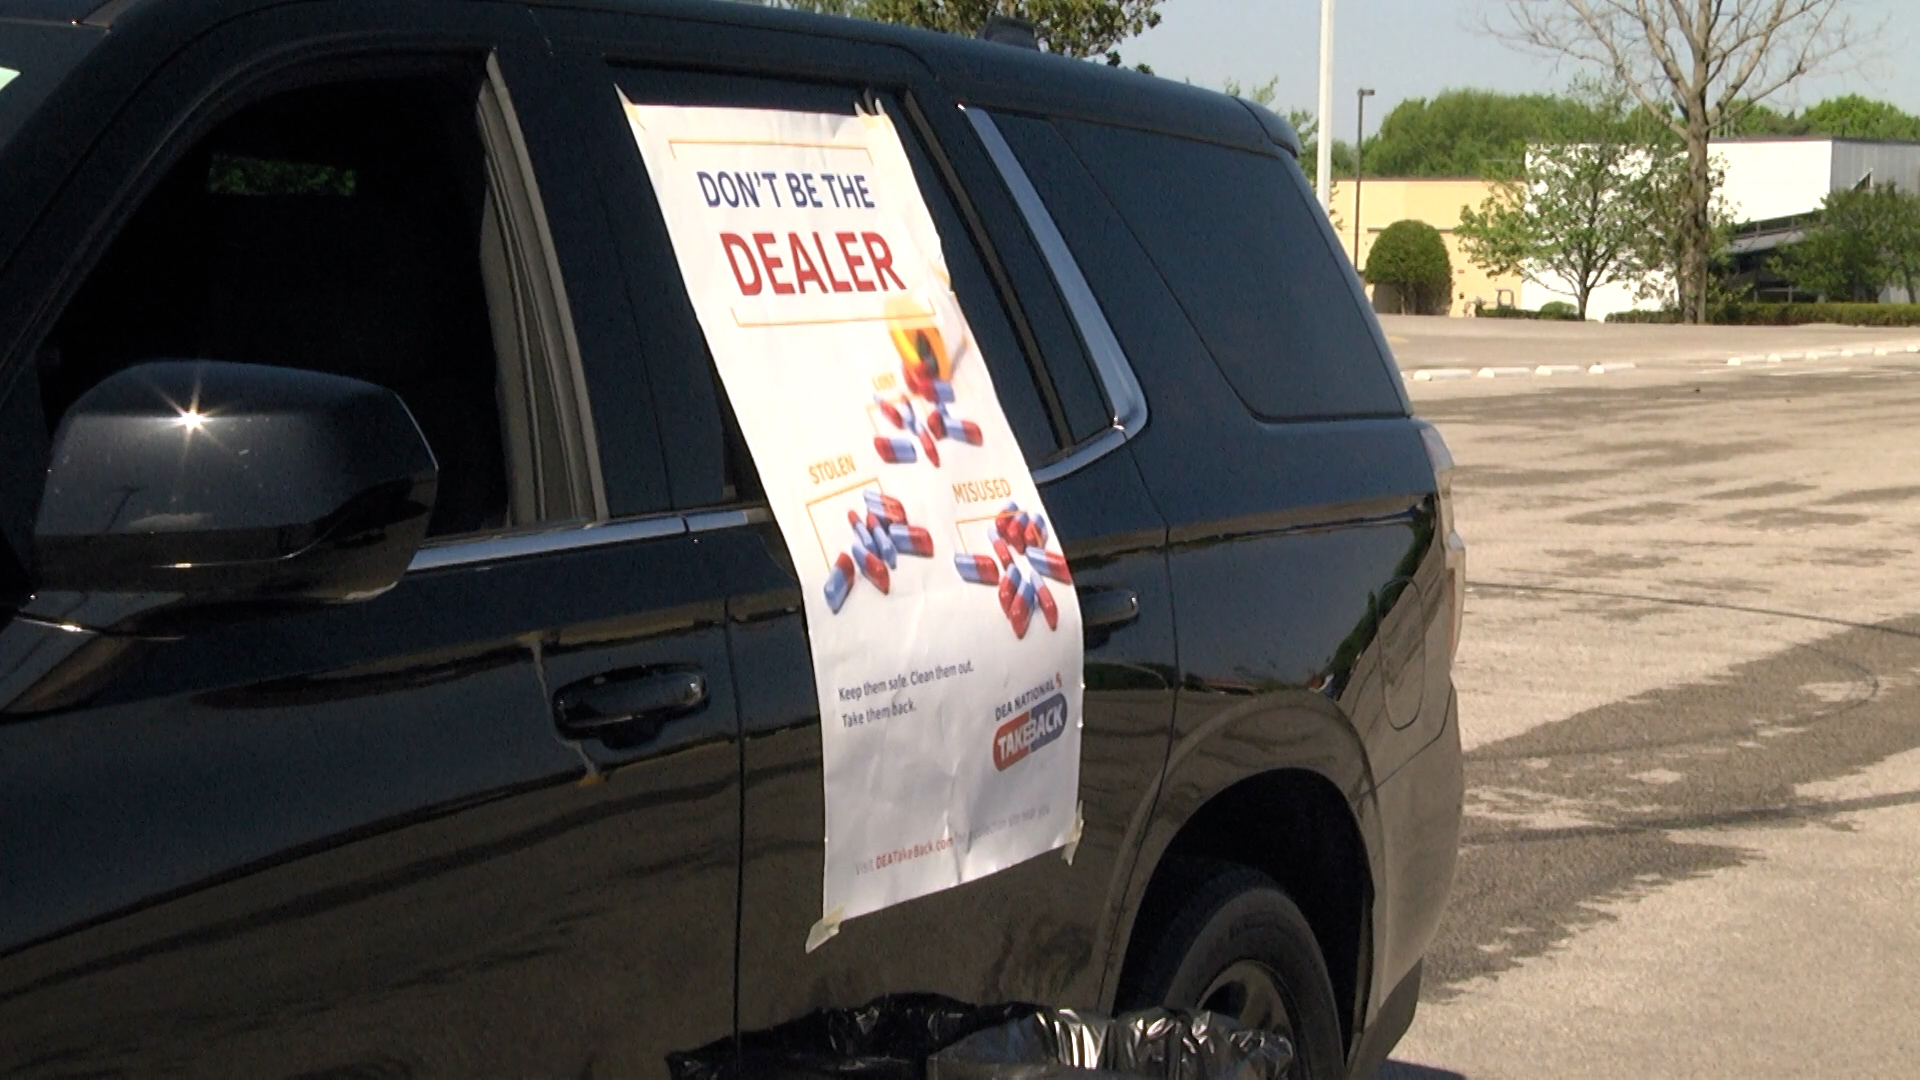 National Prescription Drug Take Back Day took place Saturday in Bowling